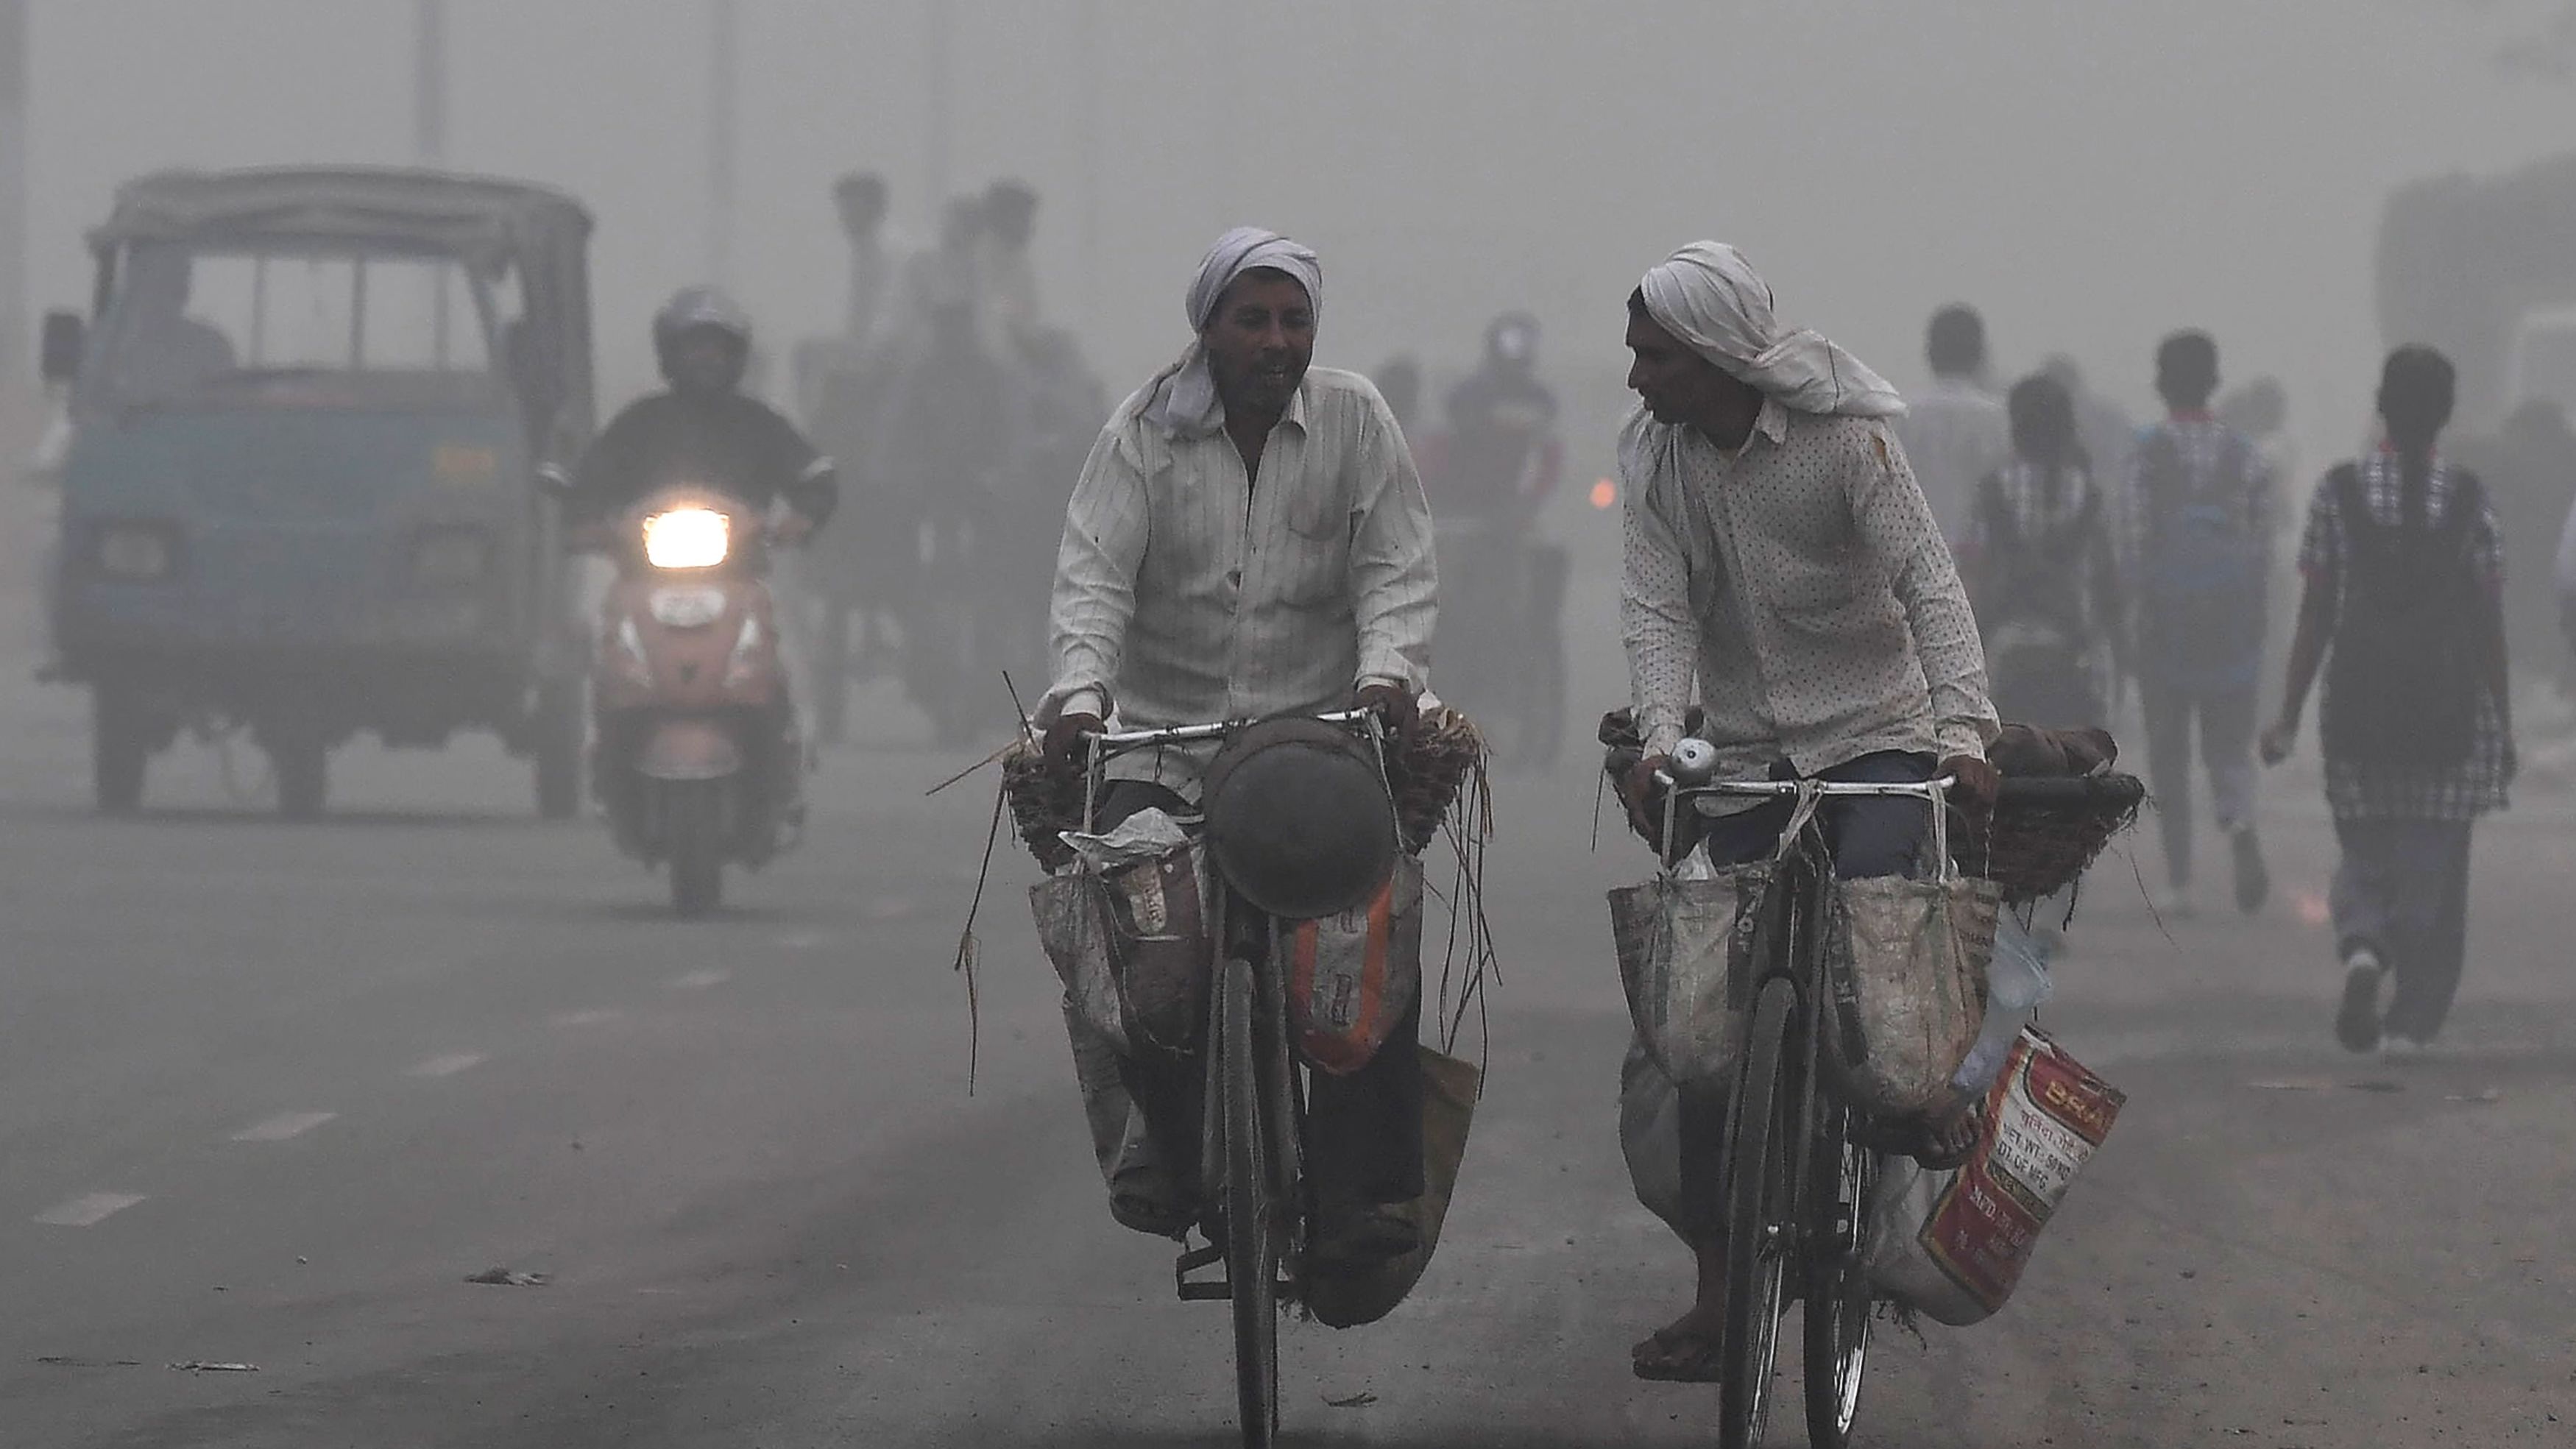 Commuters in the Indian capital make their way across the city amid heavy smog, November 7, 2017.